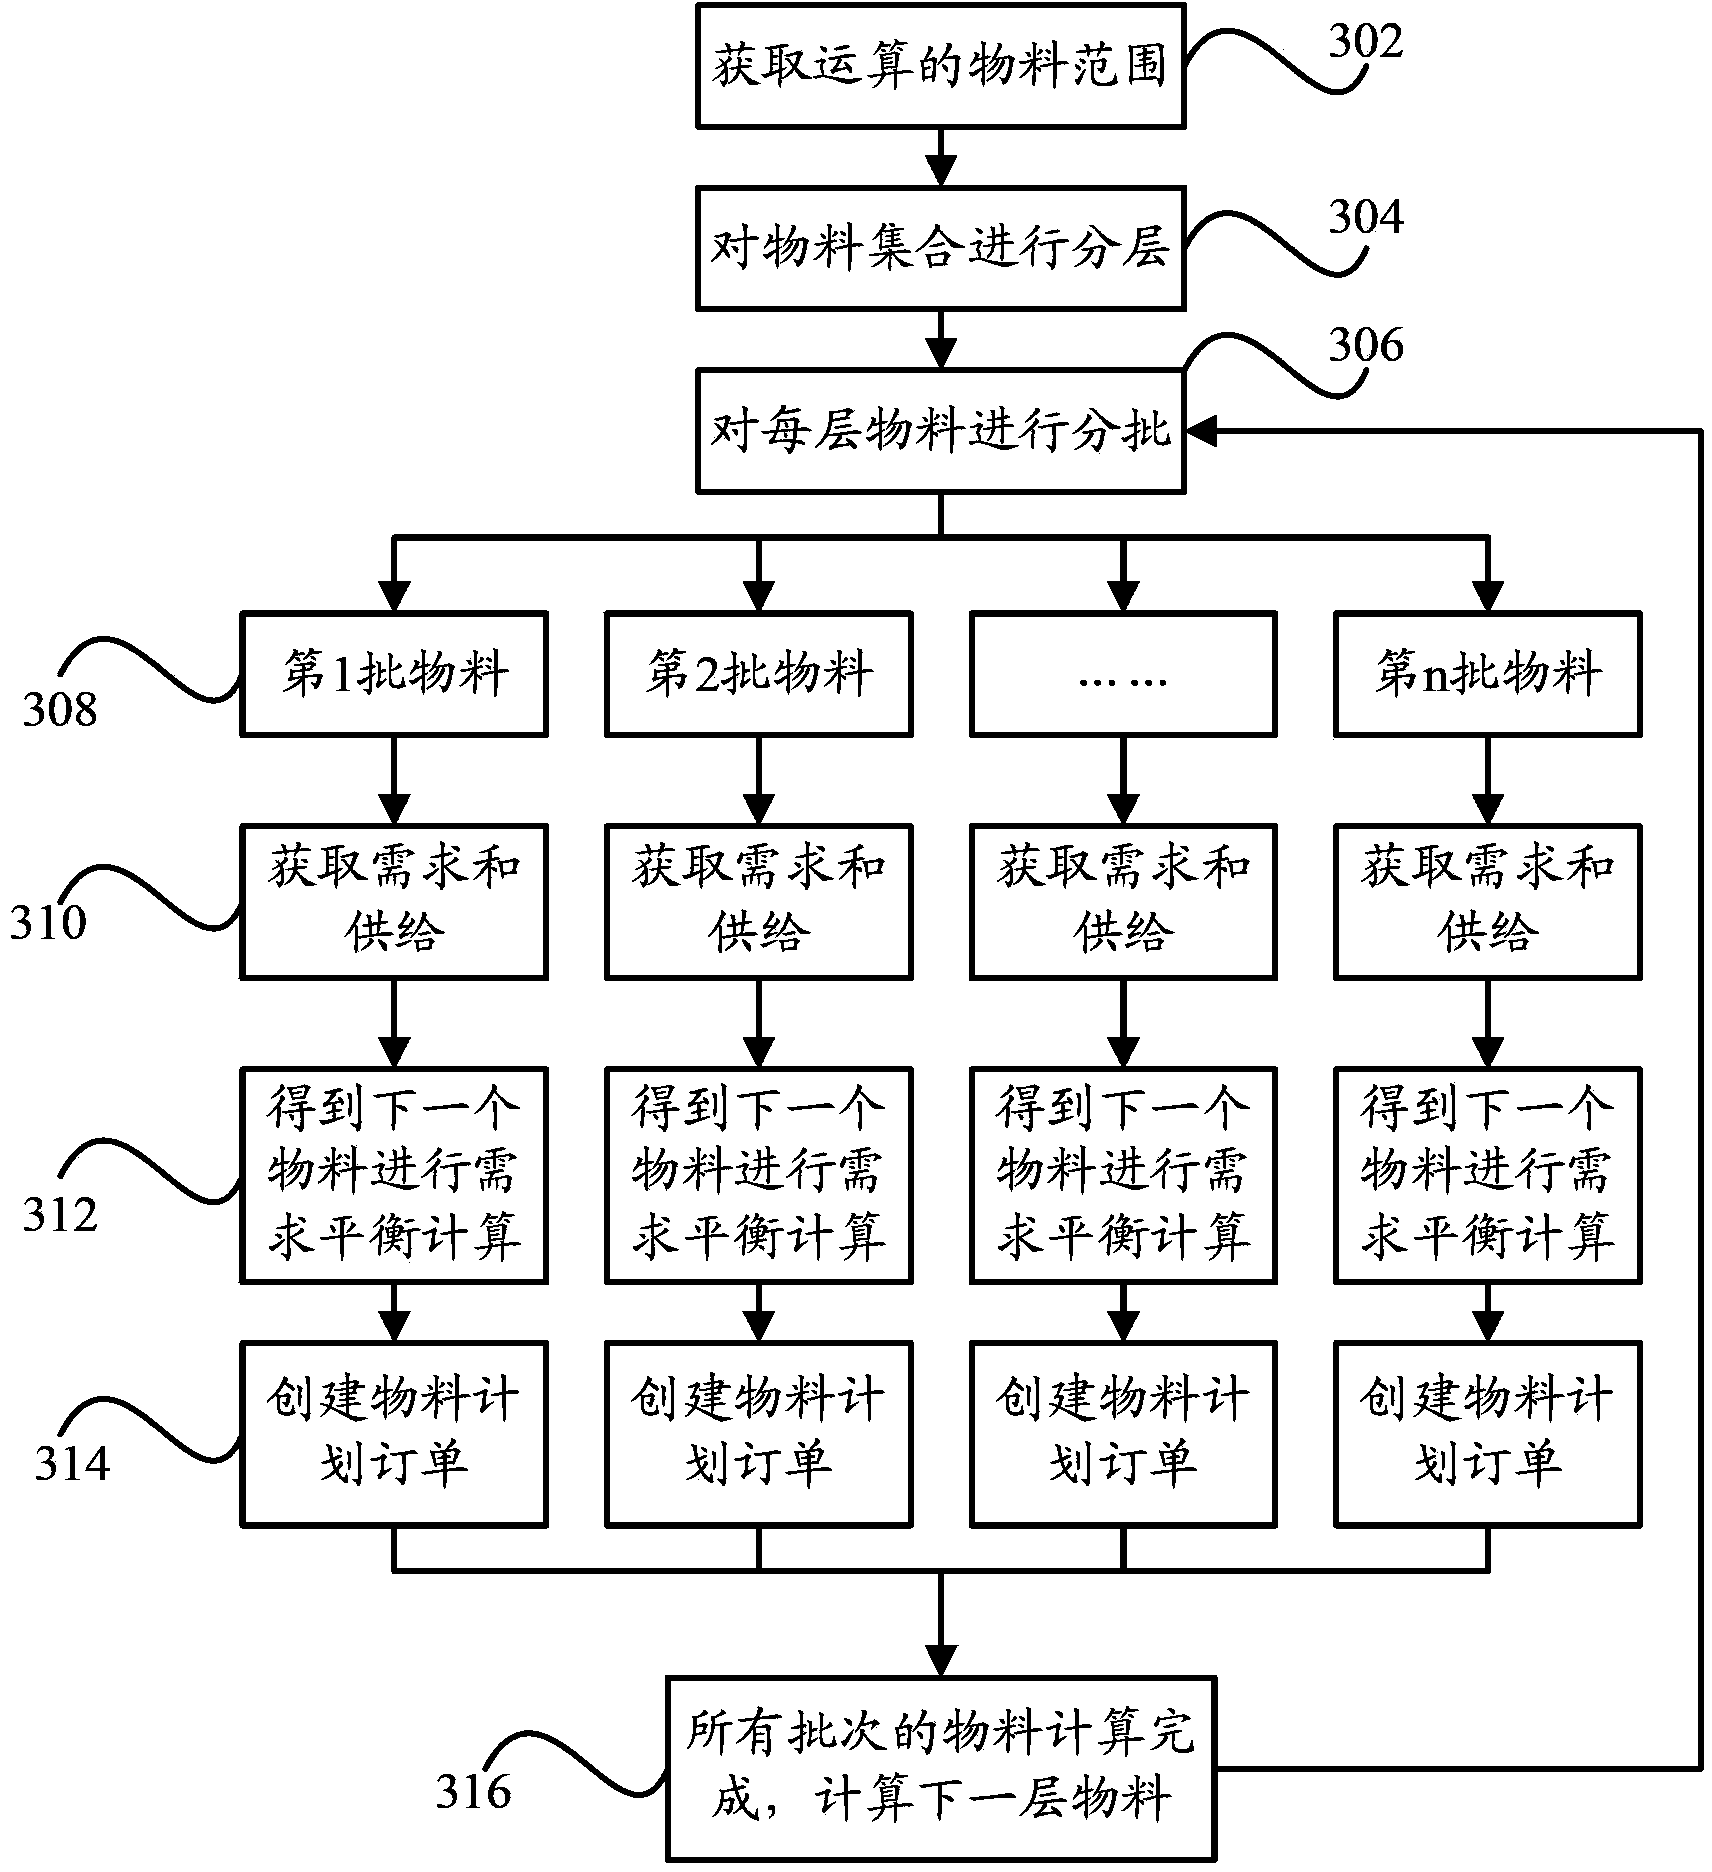 Data processing device and method based on stored data grids